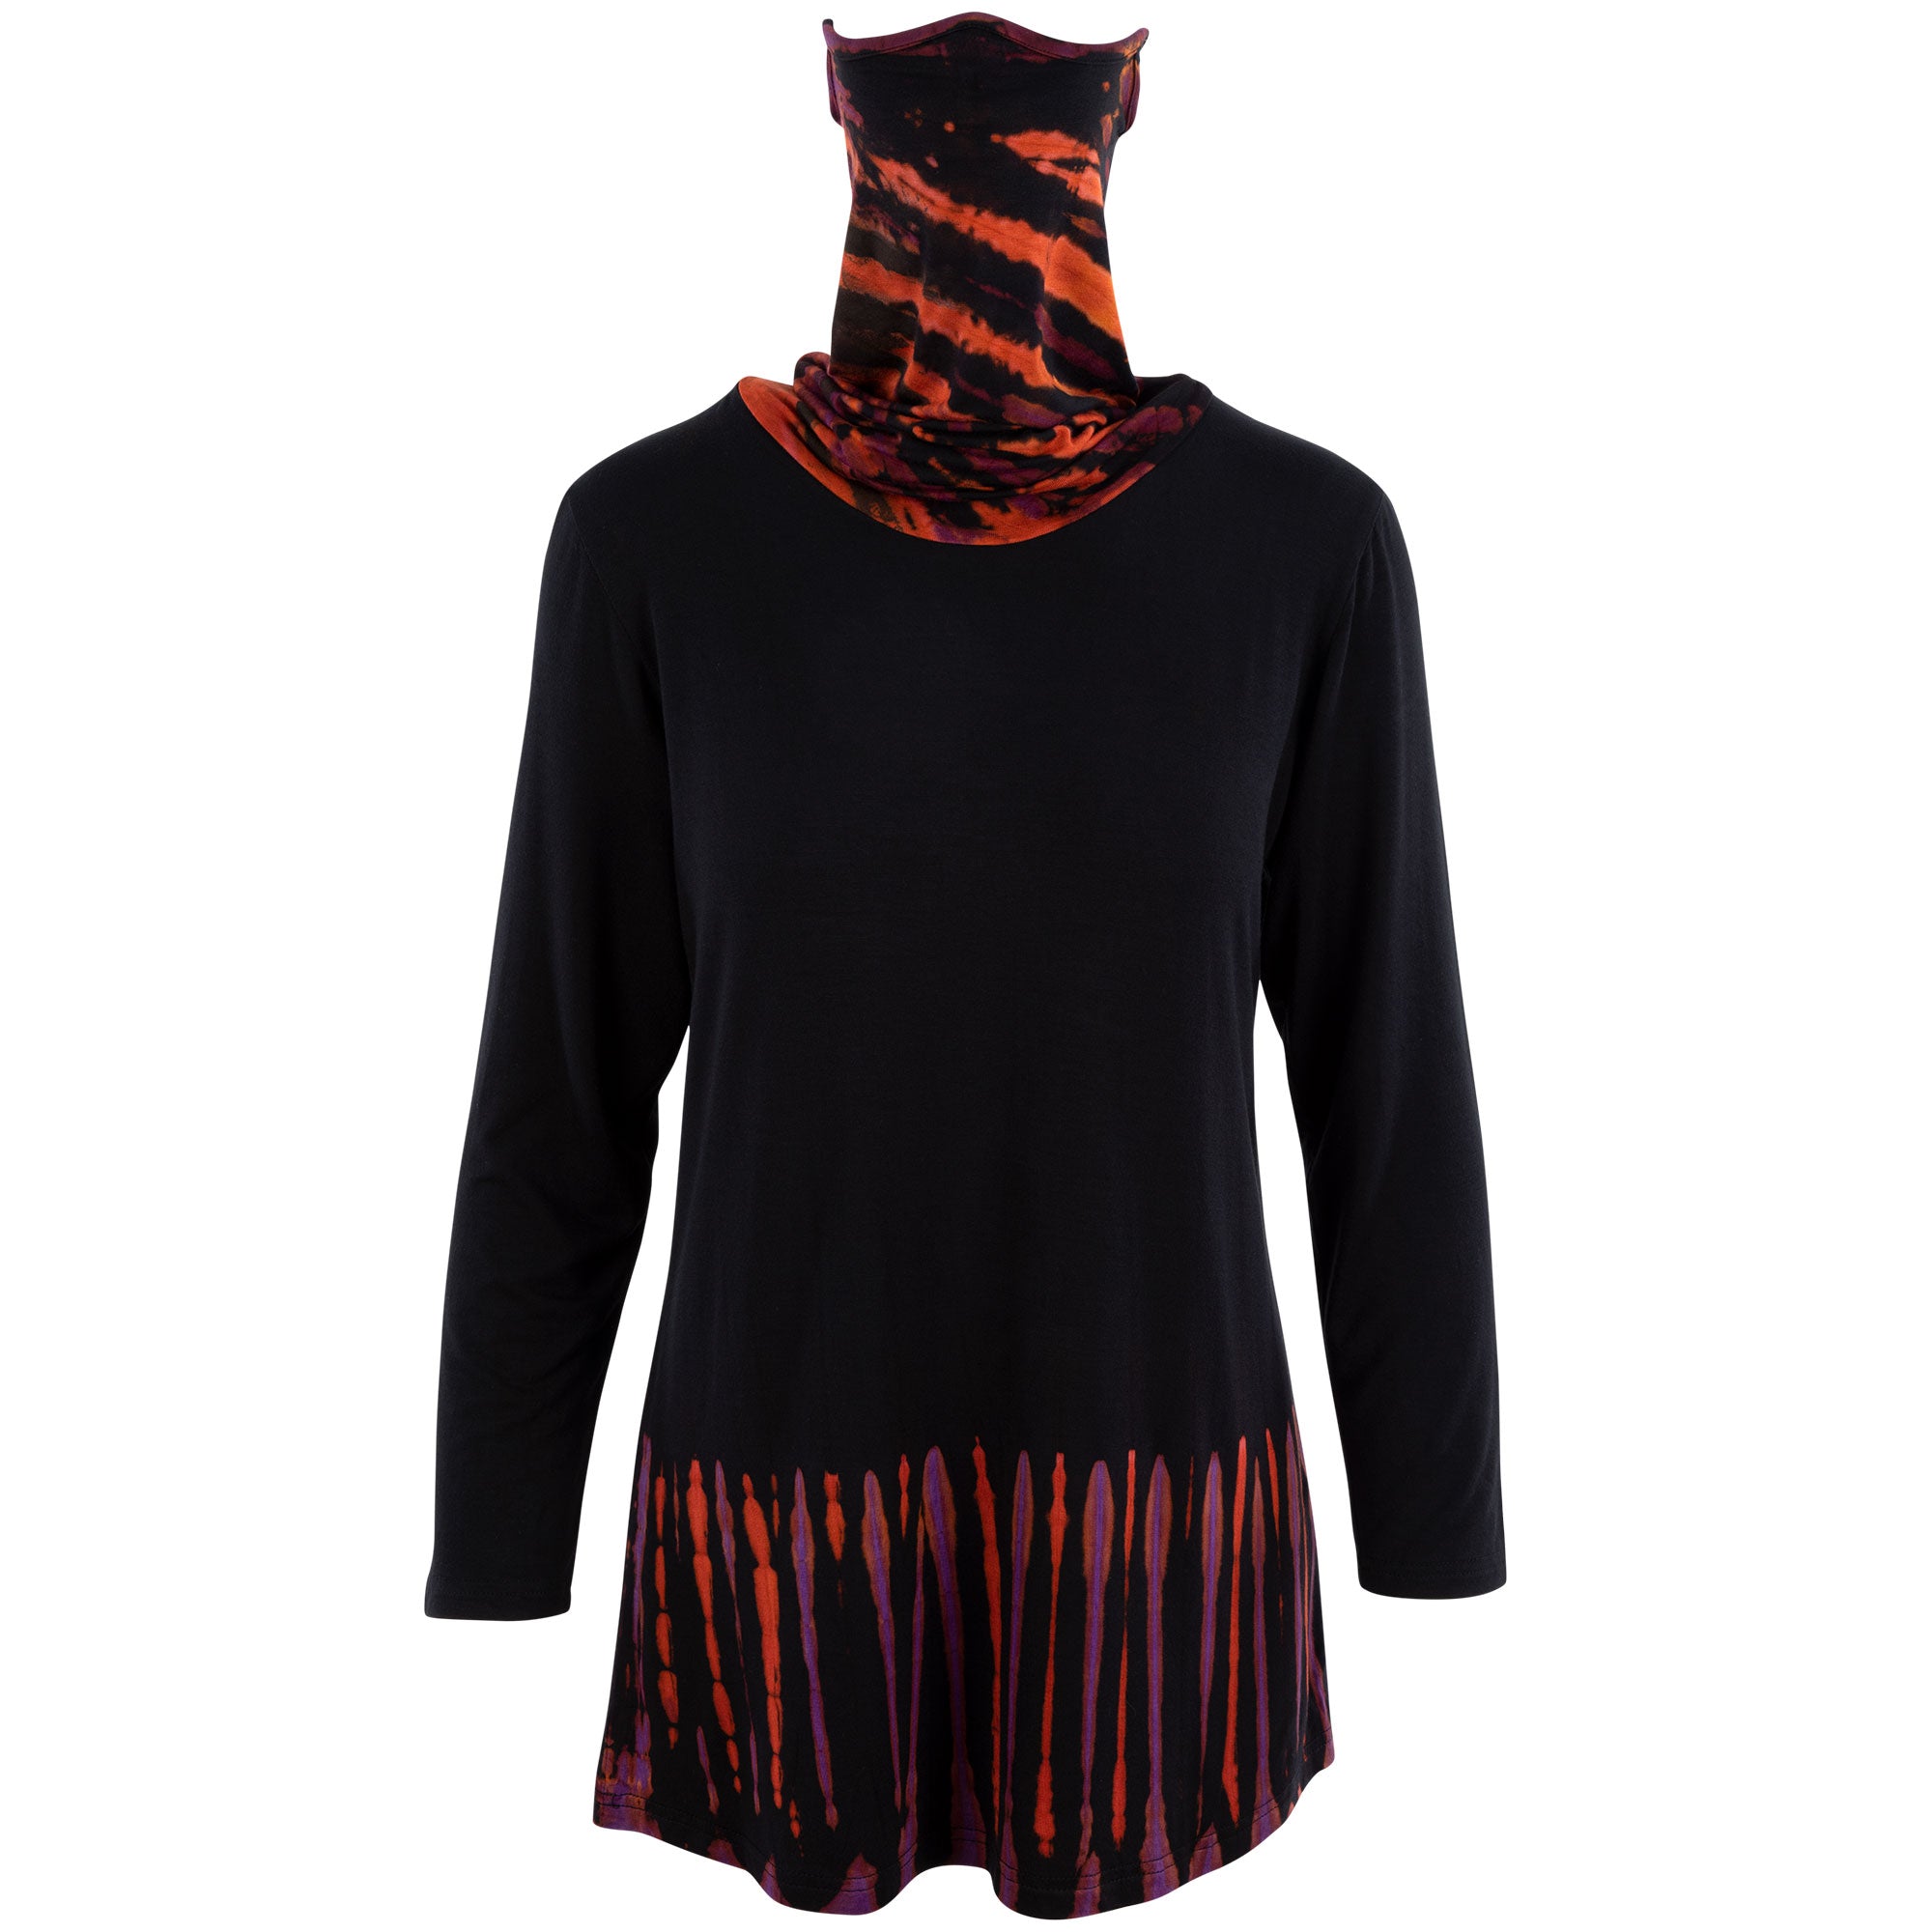 Tie-Dye Tunic With Face Mask - Burnt Orange - L